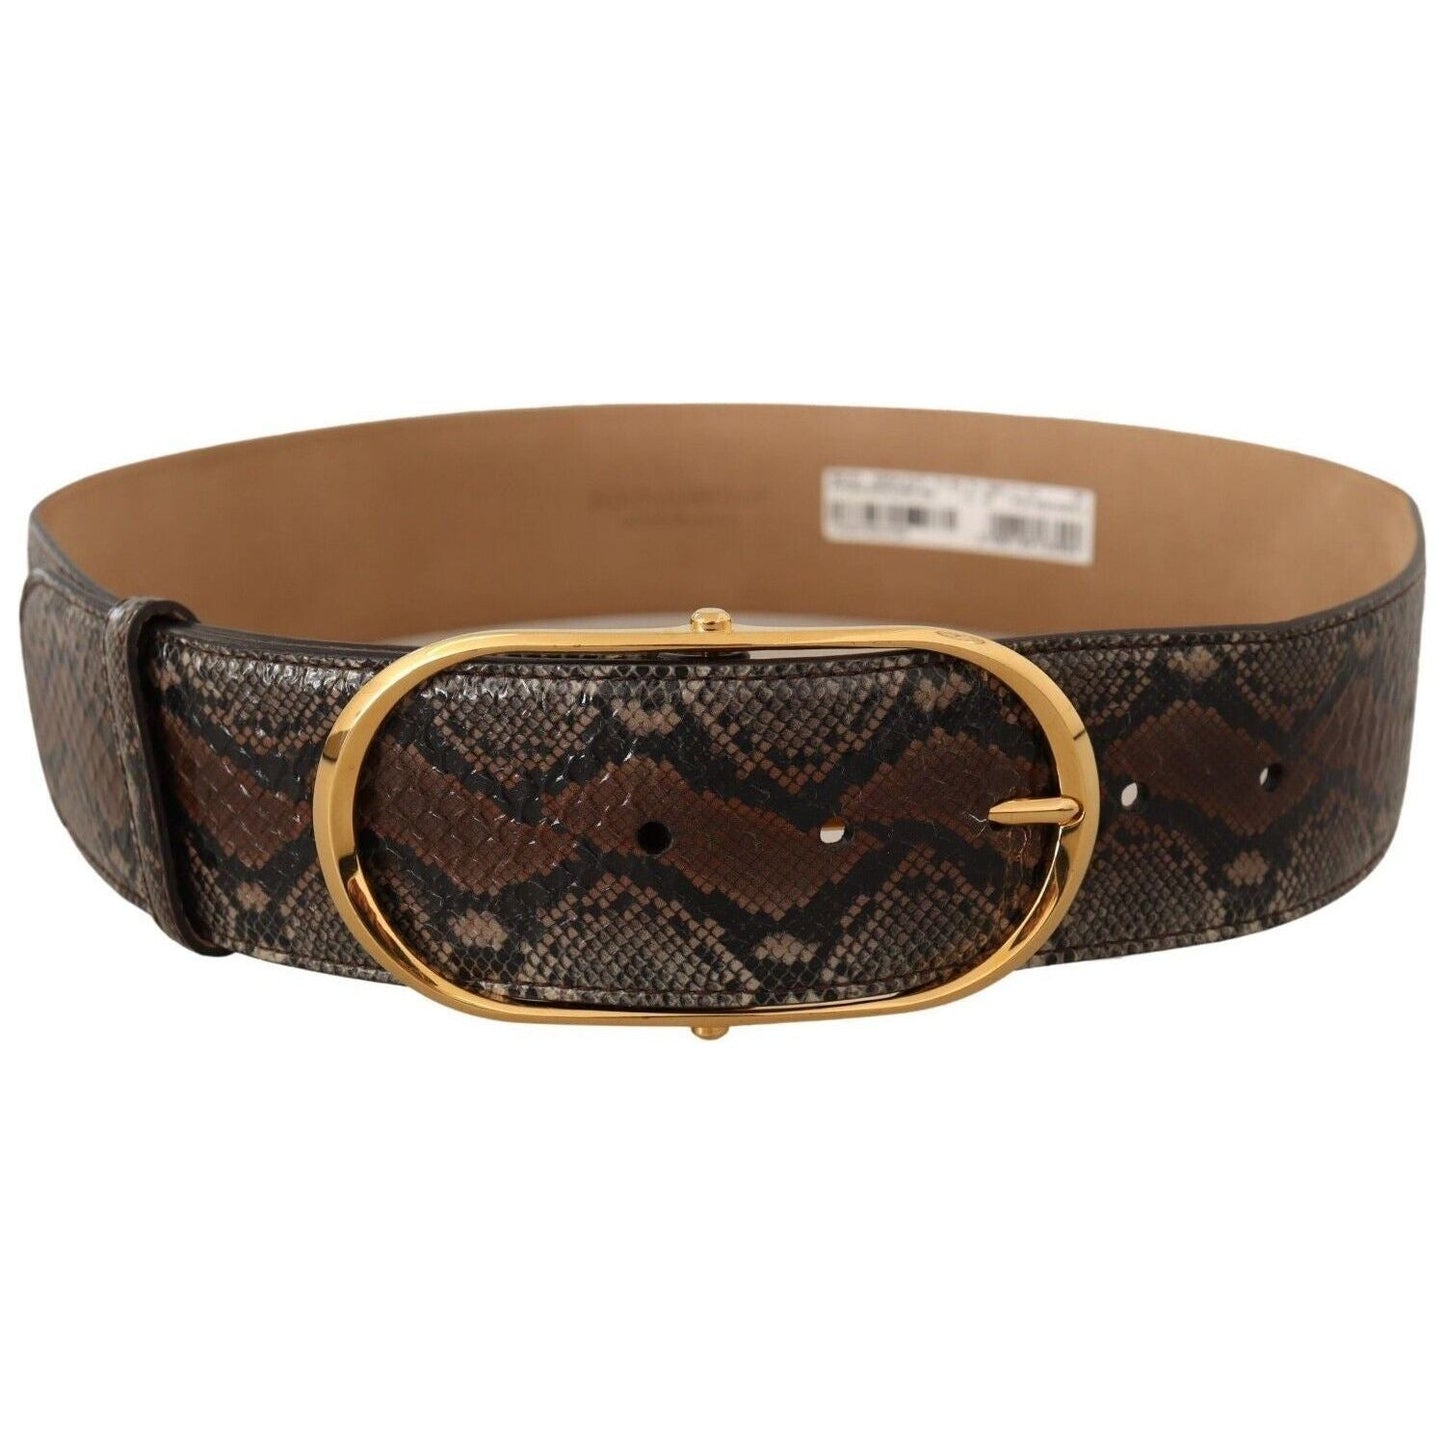 Dolce & Gabbana Elegant Brown Leather Belt with Gold Buckle WOMAN BELTS brown-exotic-leather-gold-oval-buckle-belt-5 s-l1600-3-216-6282e359-671.jpg